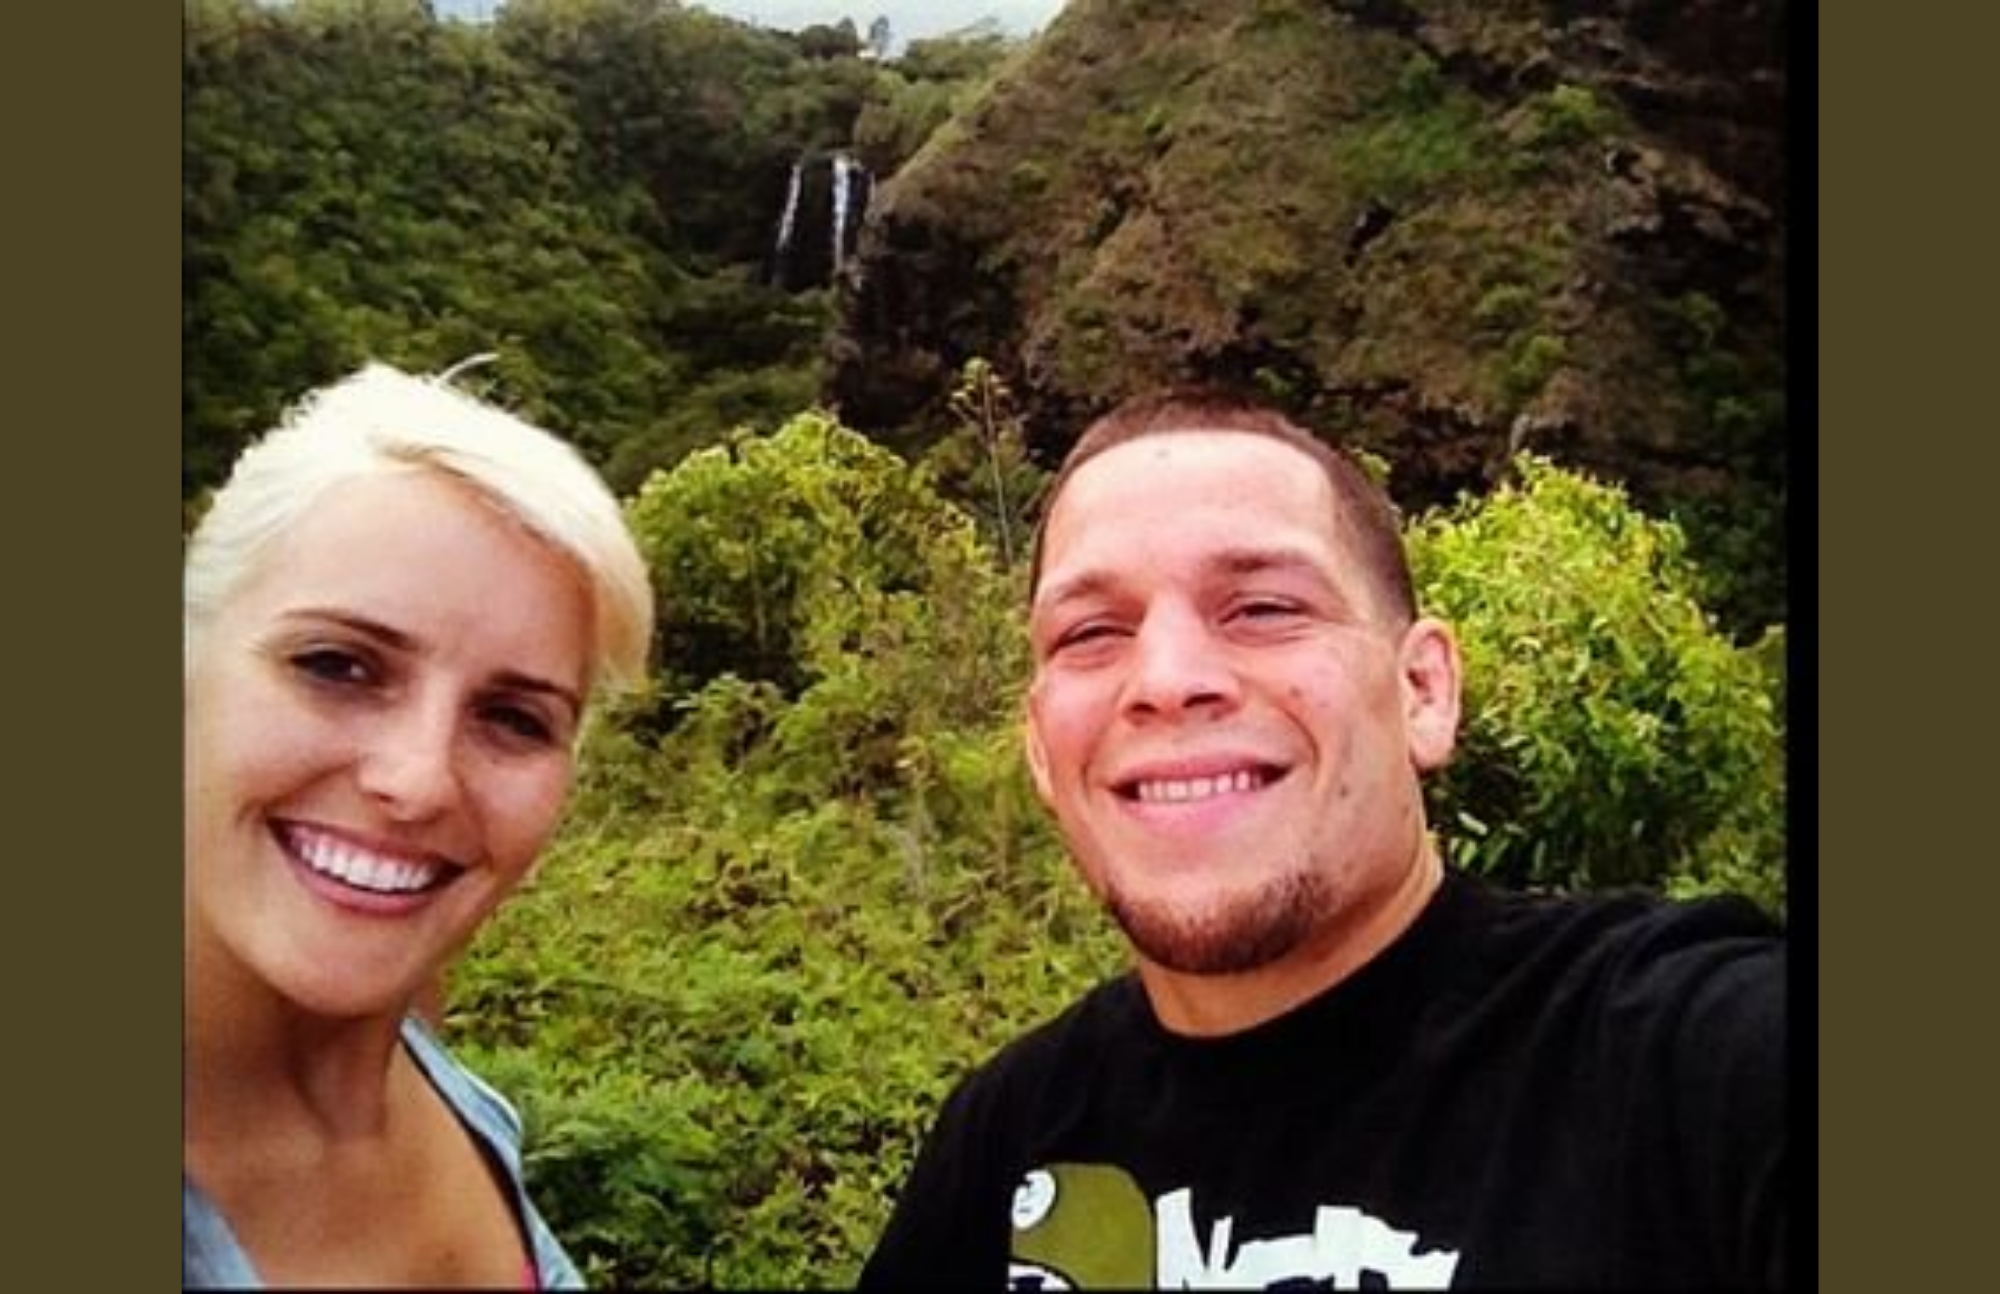 Nate Diaz takes a selfie with his girlfriend Misty Brown